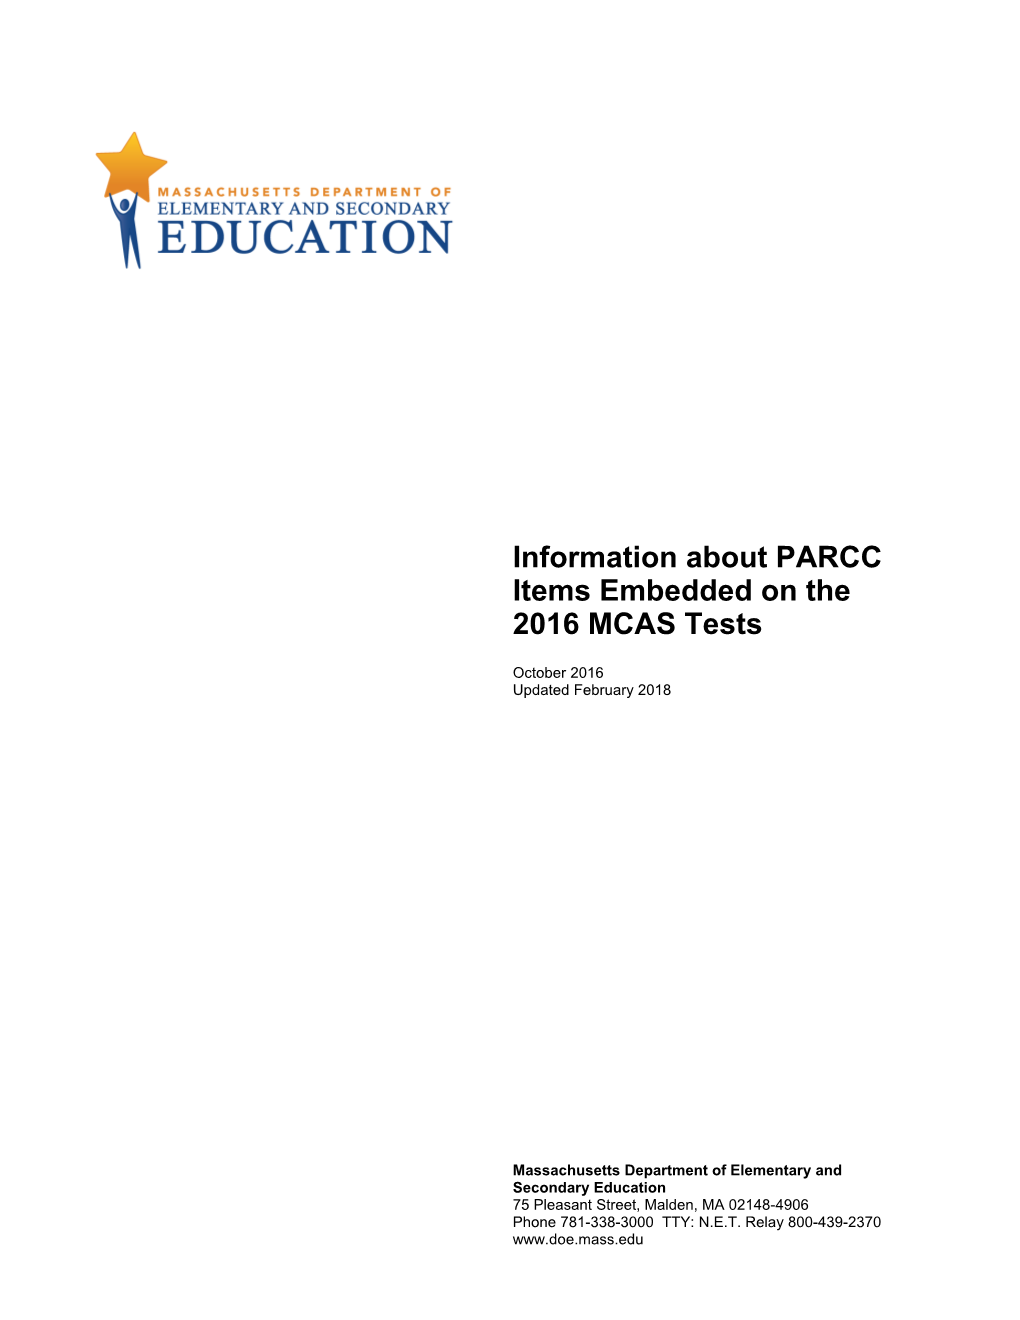 Information About PARCC Items Embedded on the 2016 MCAS Tests